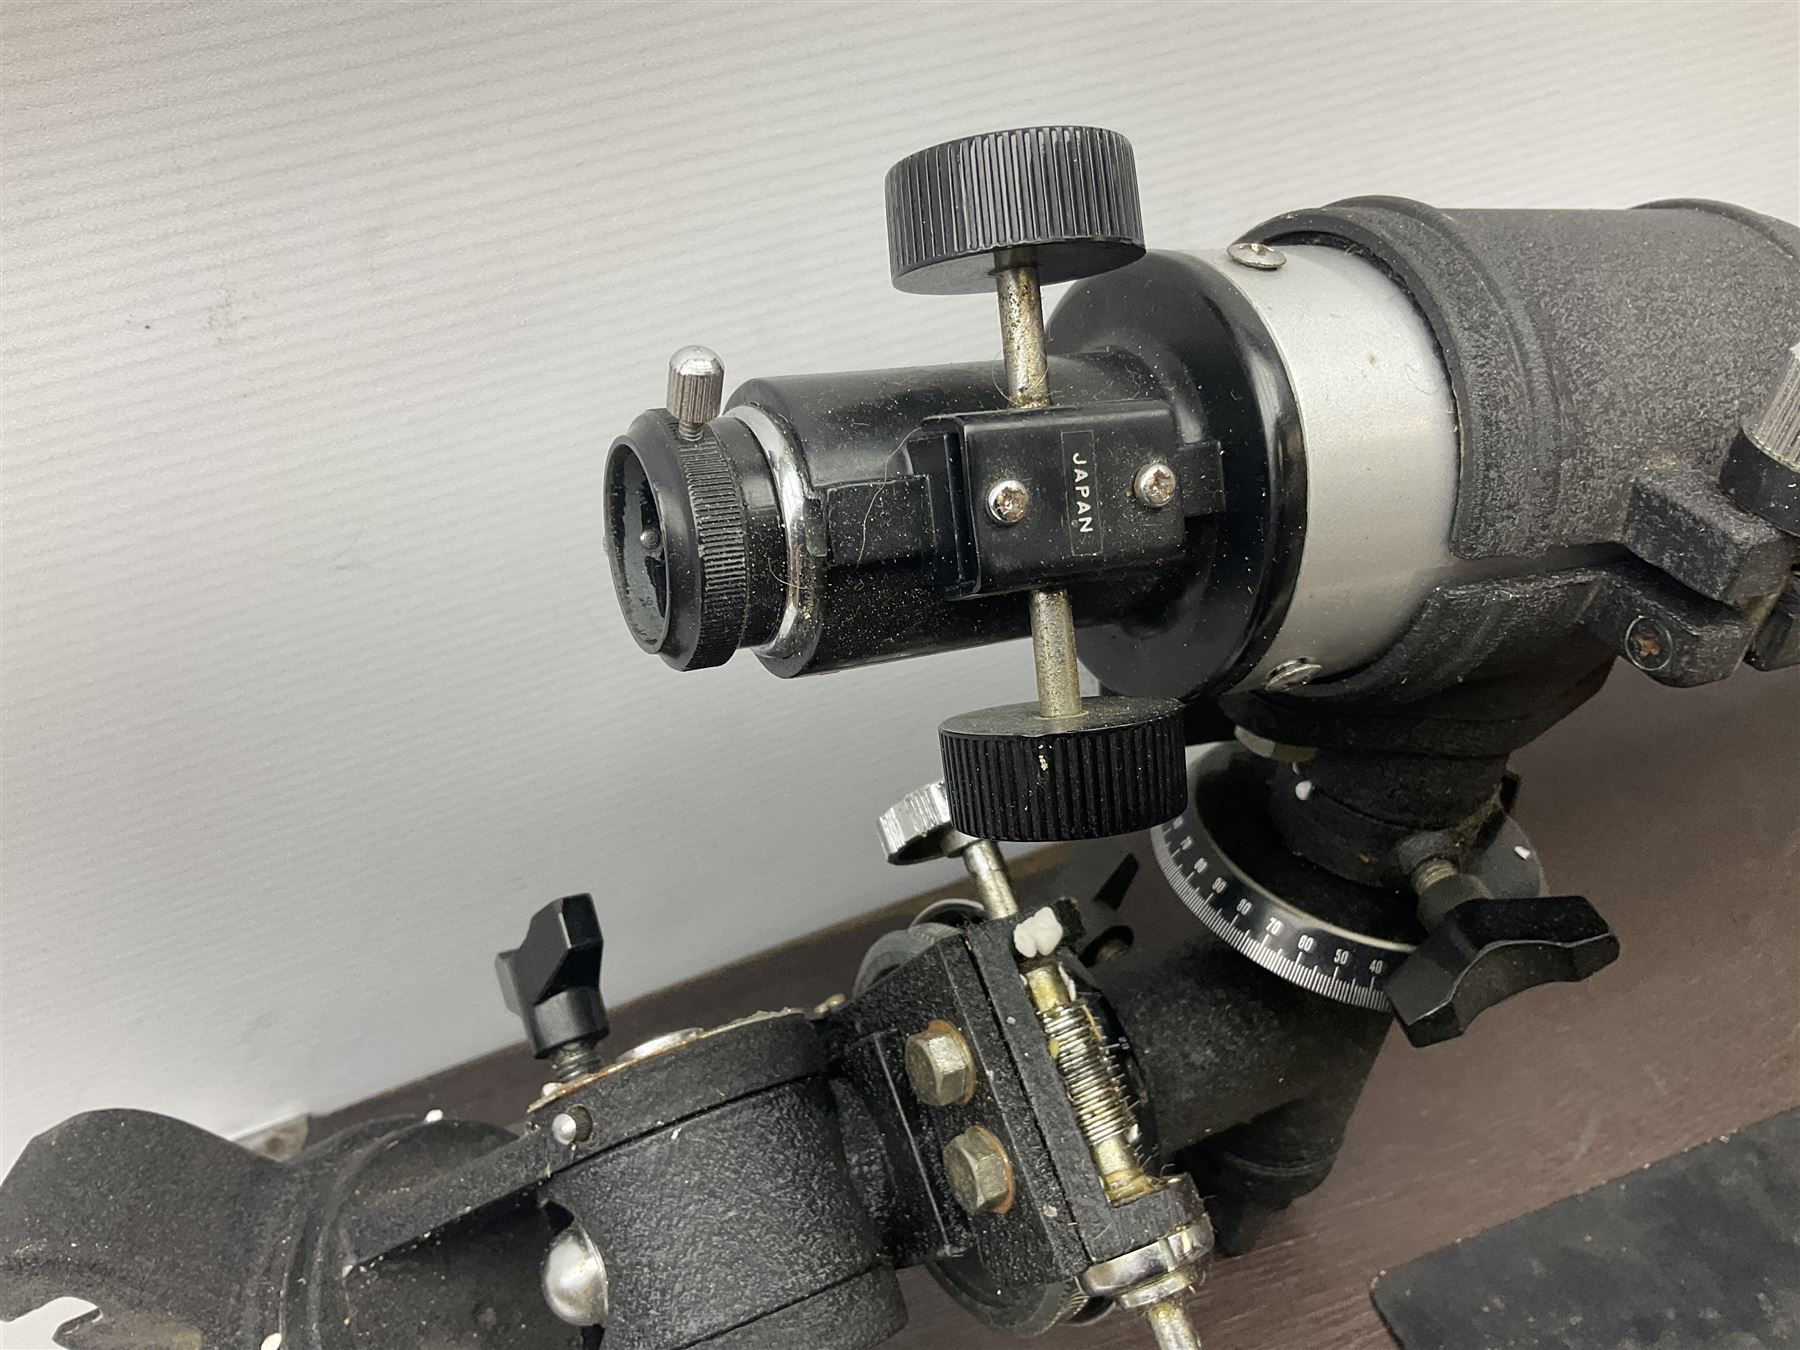 Astronomical telescope with achromatic coated lens - Image 3 of 11